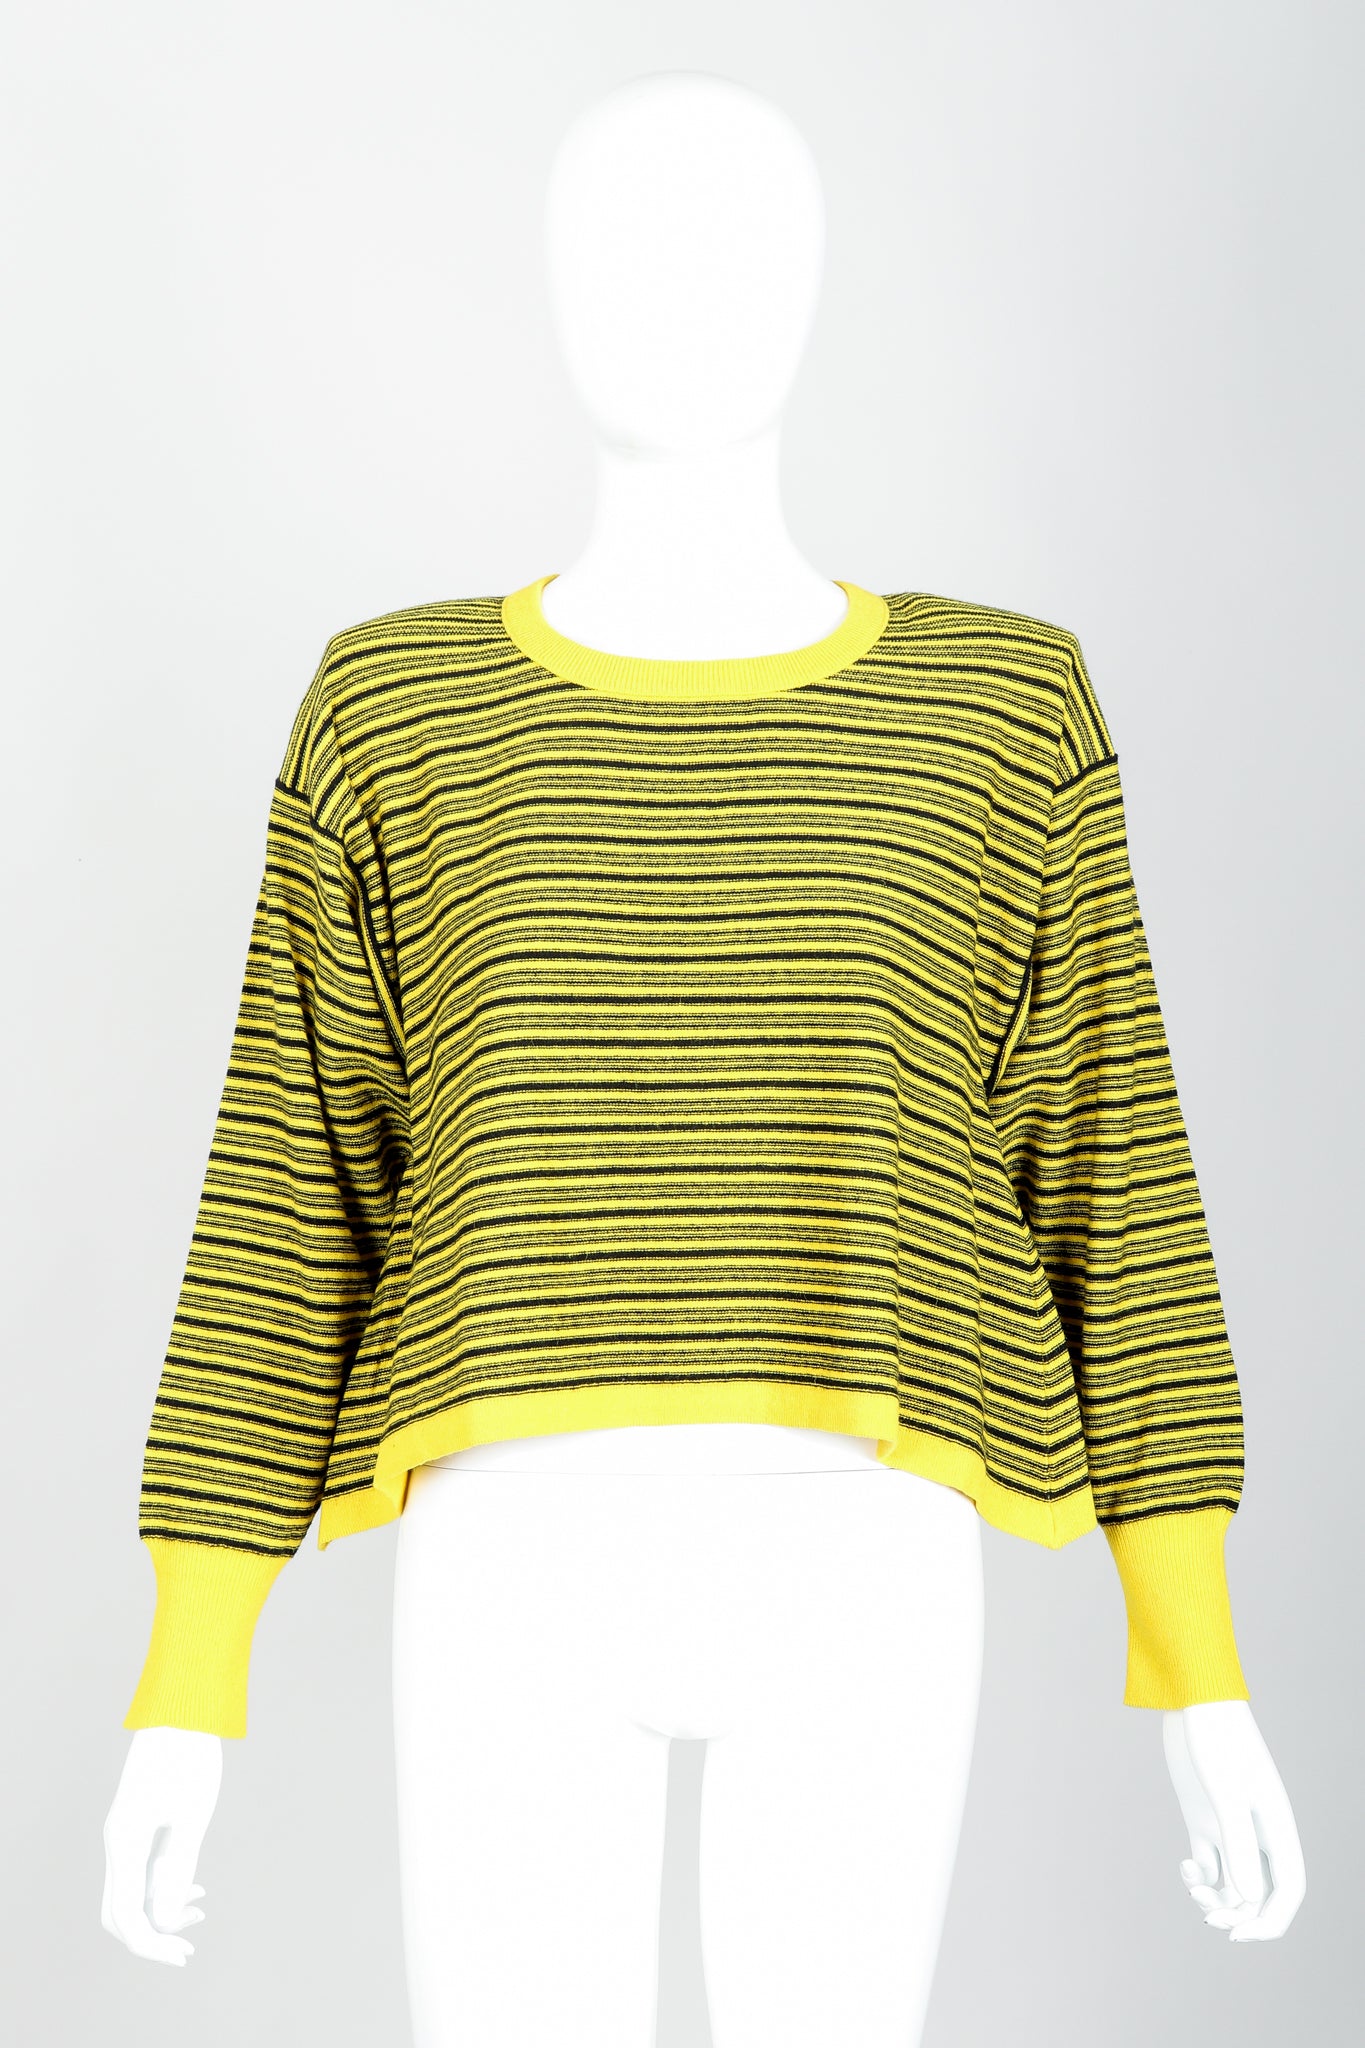 Vintage Sonia Rykiel Yellow Stripe Knit Boxy Sweater on Mannequin Front at Recess